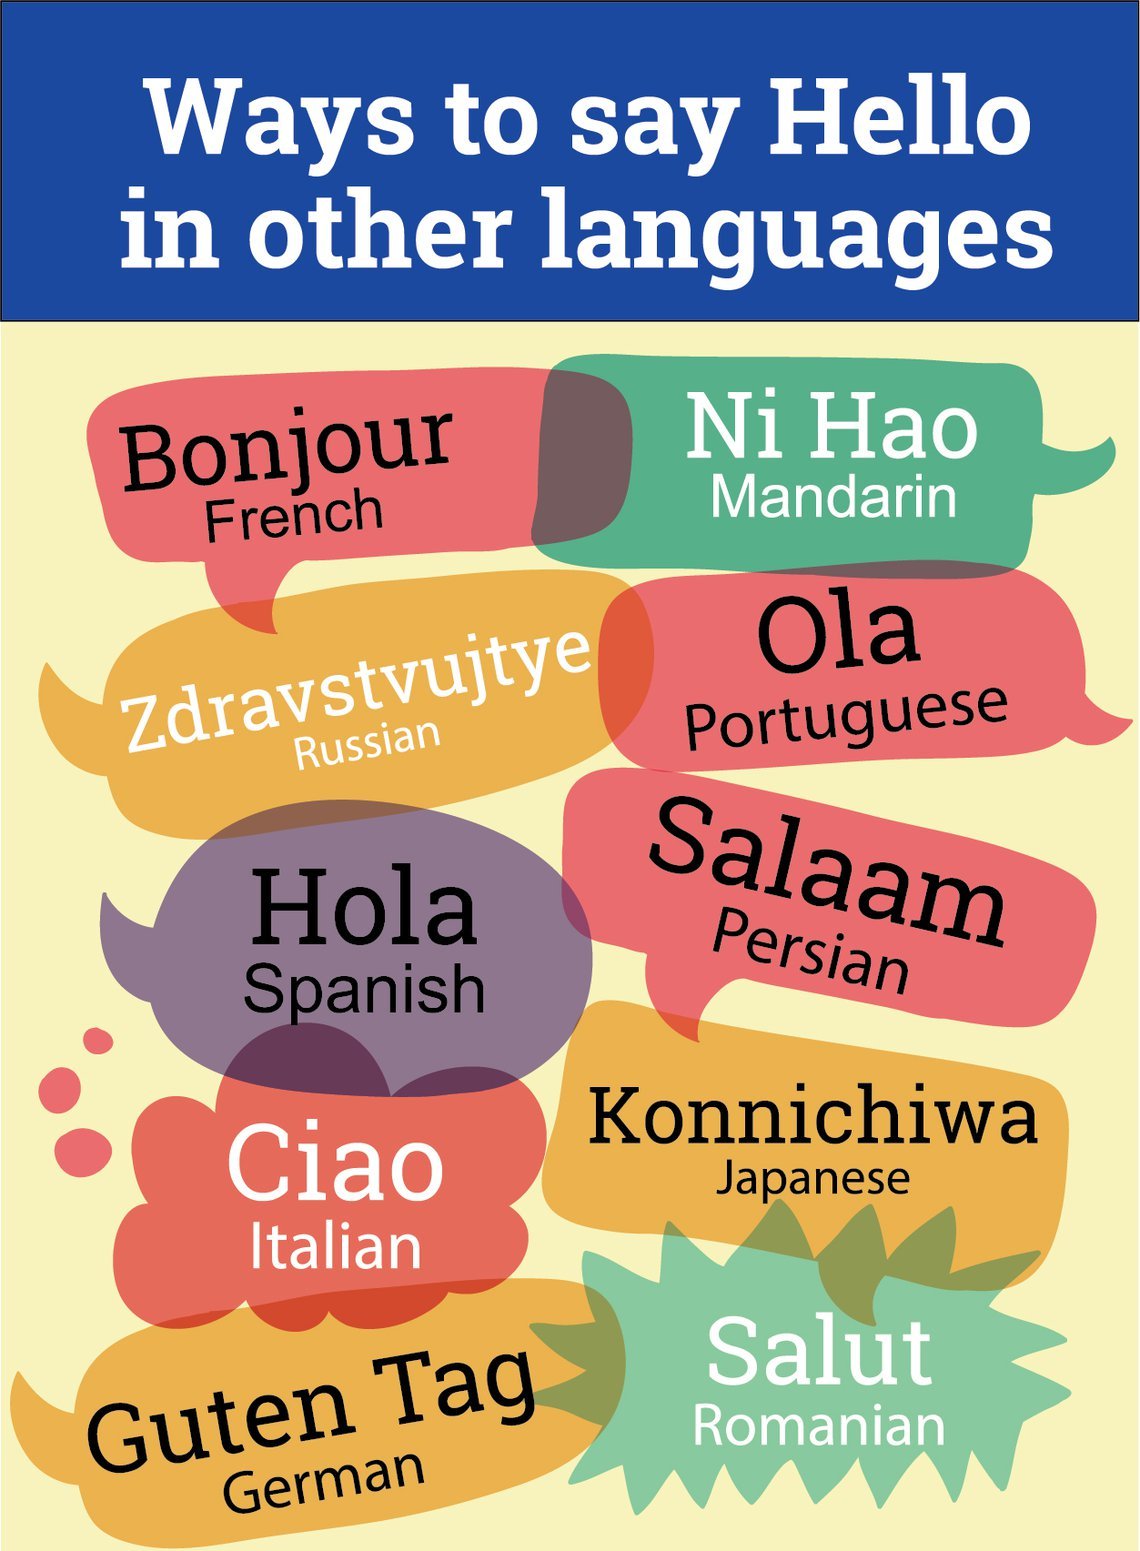 How To Say 'Hello' In 10 Different Languages